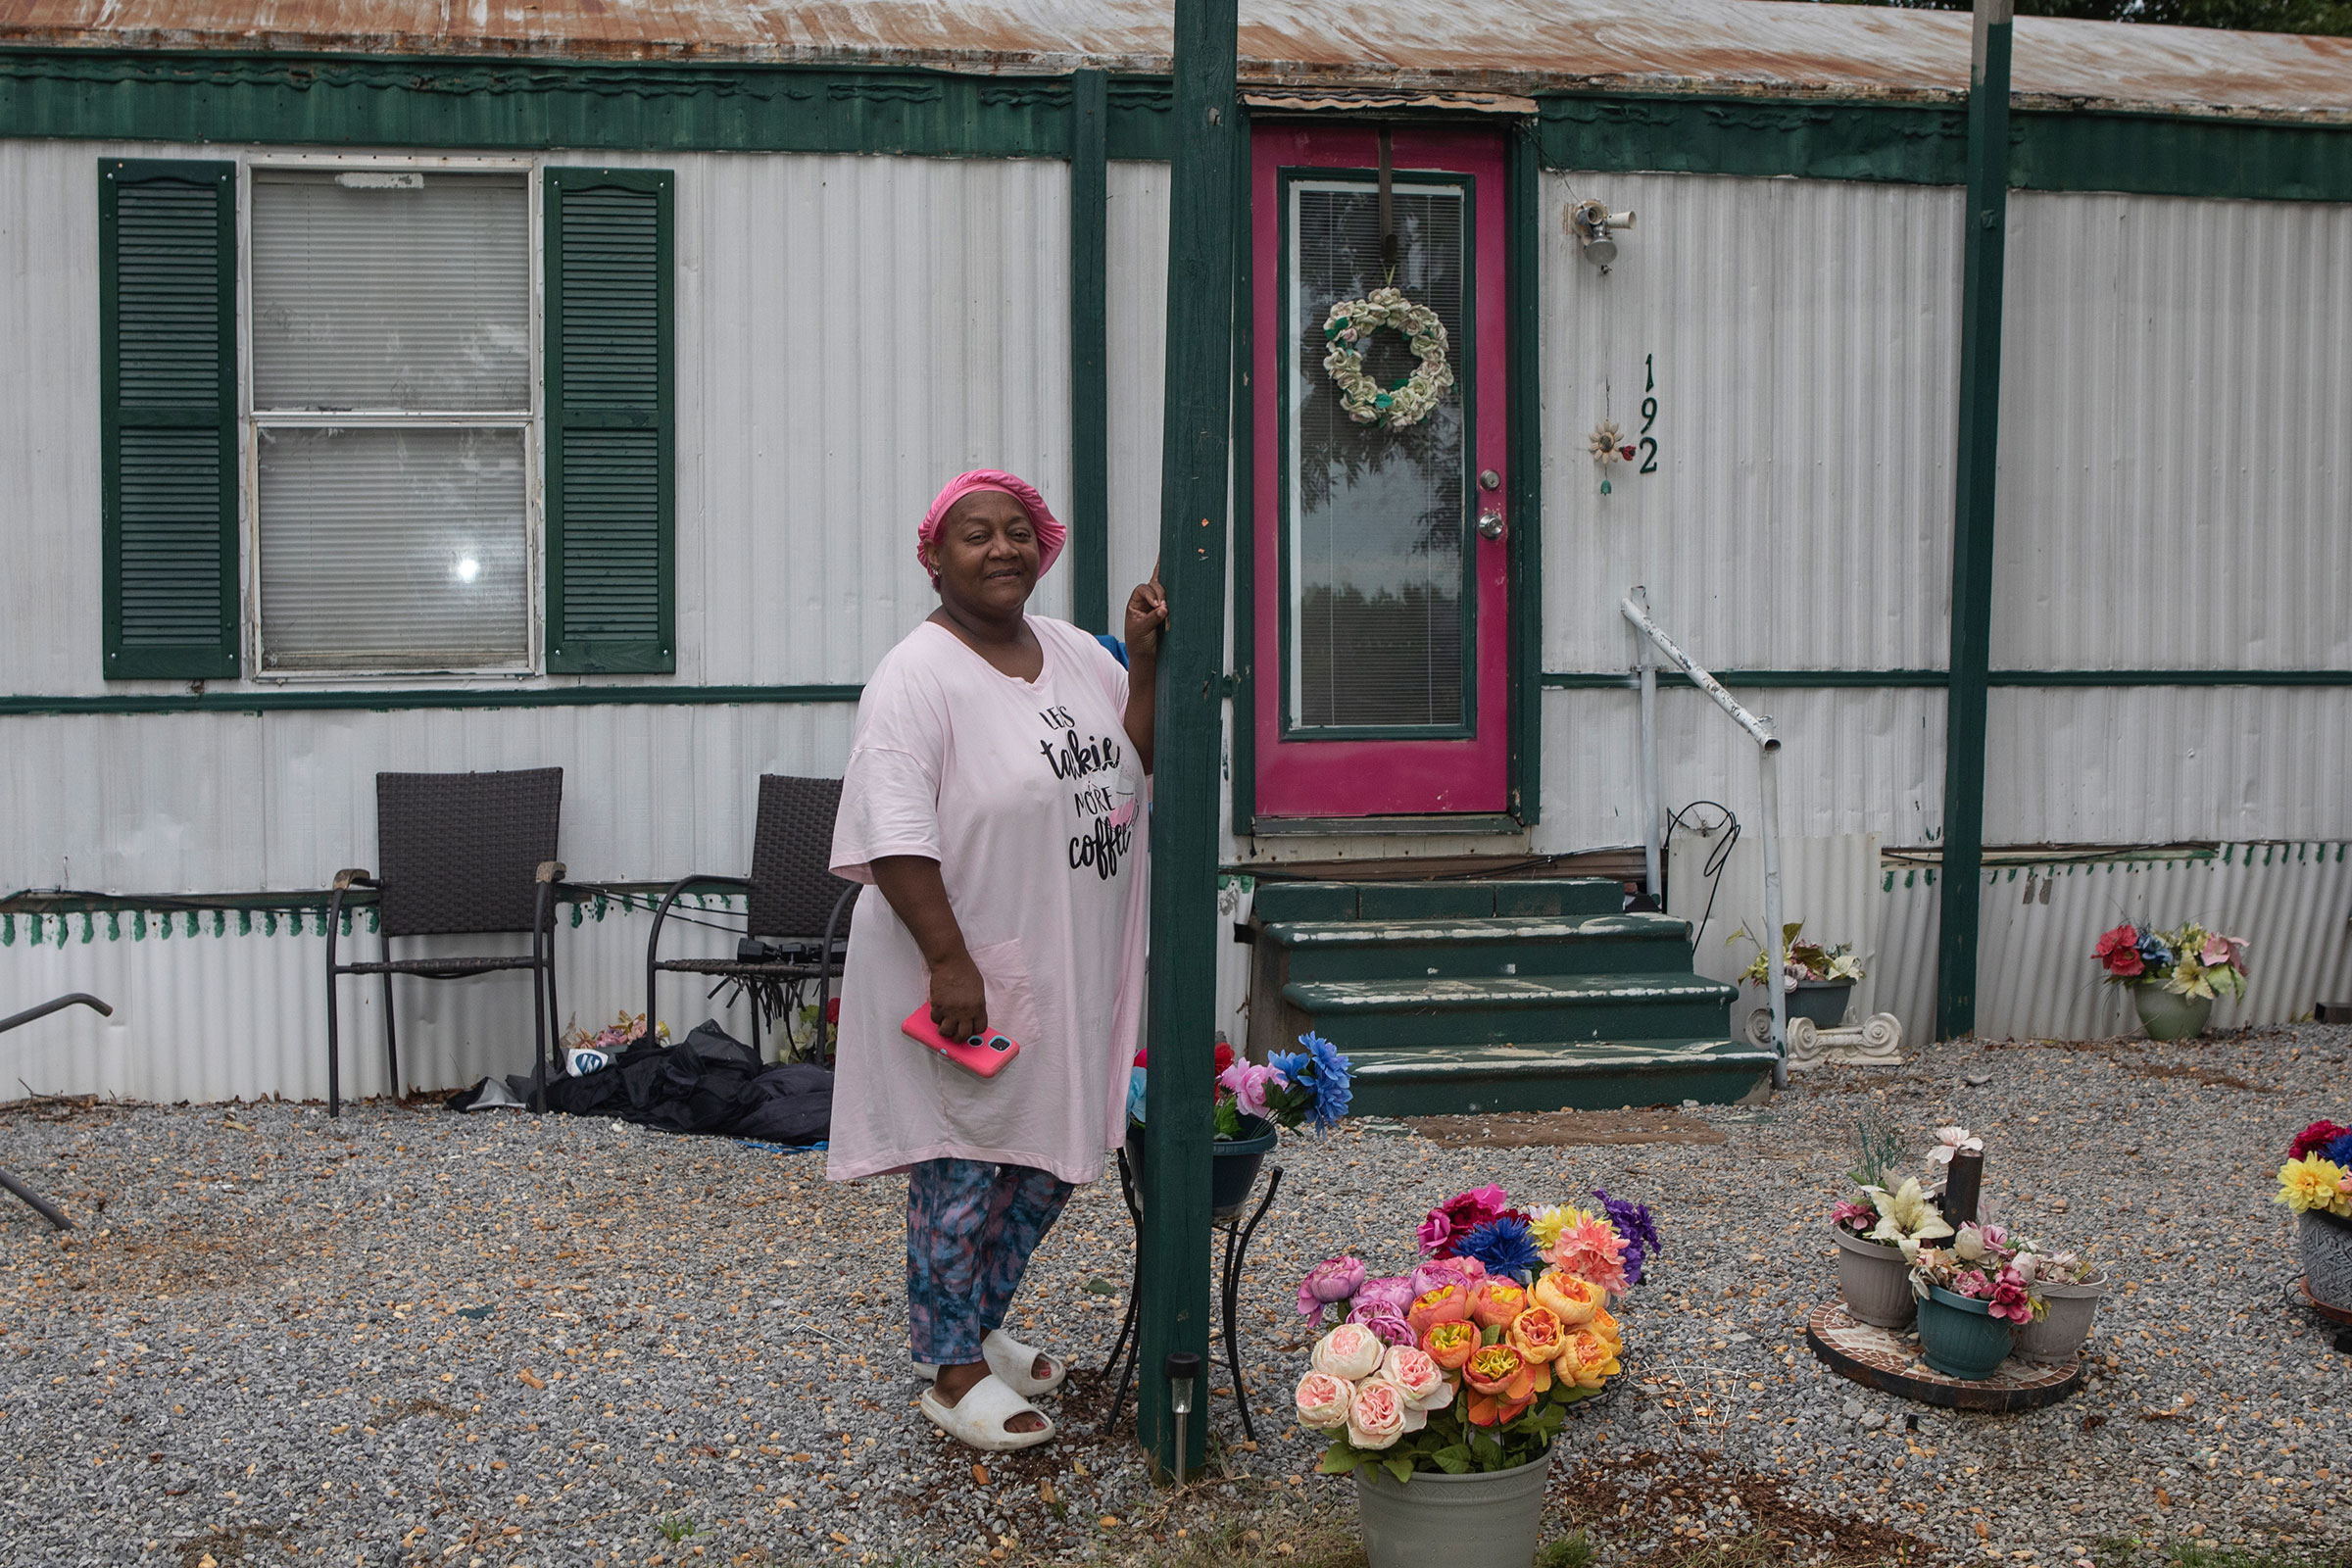 Gladys Grant stands in front of her home in Lowndes County on Aug. 1. Grant helped conduct a survey of sanitation conditions in the community. (Charity Rachelle for TIME)